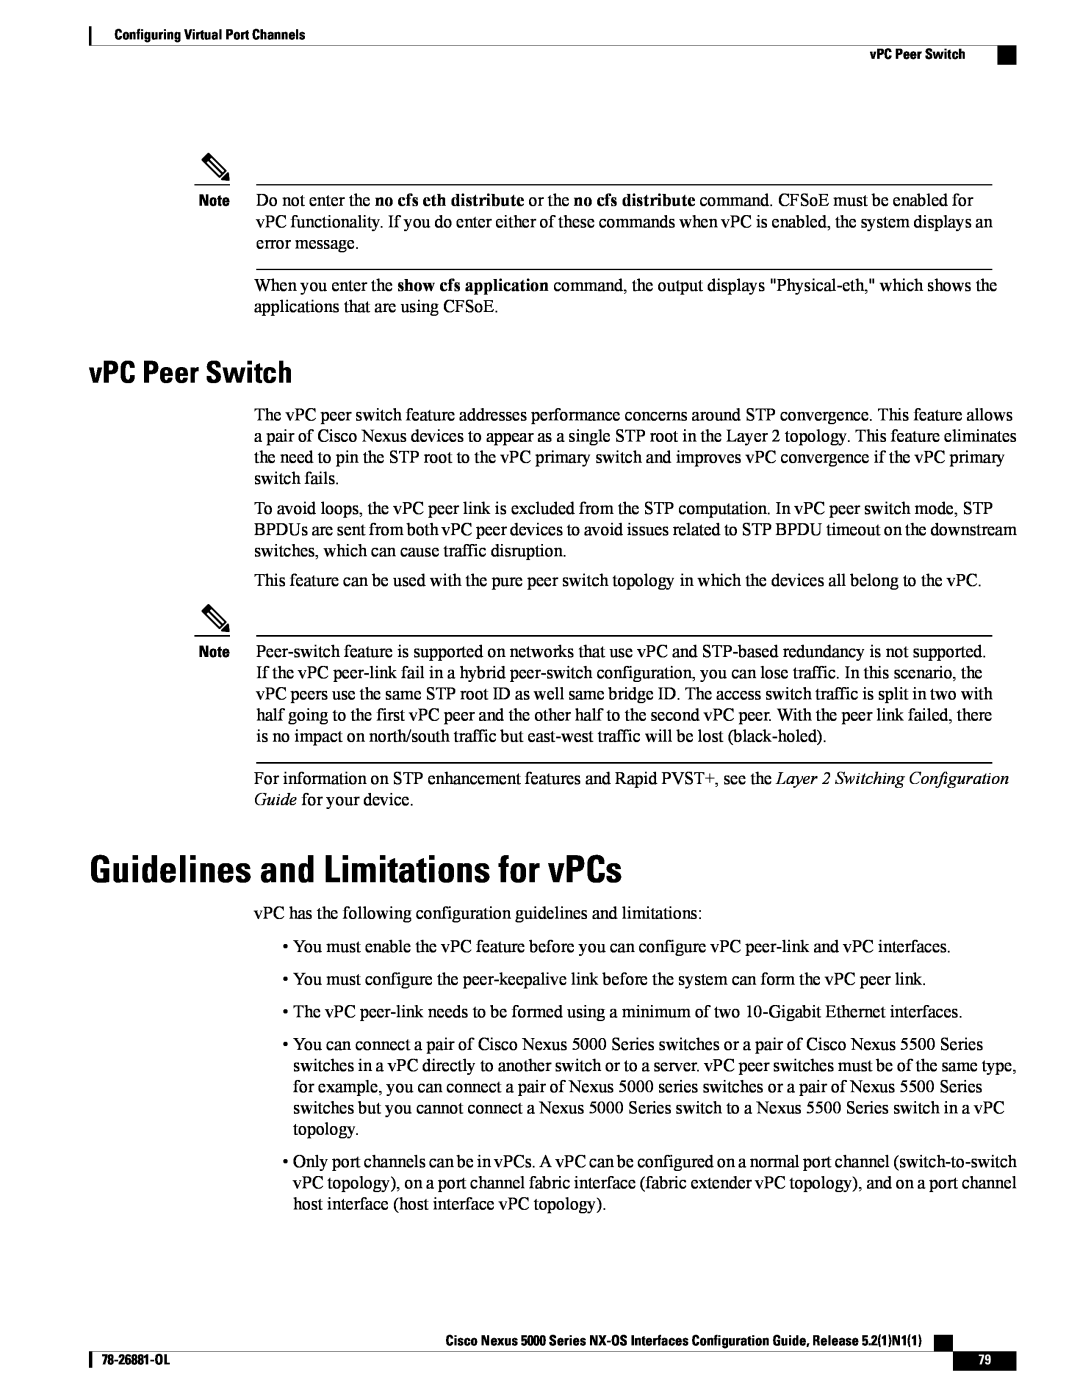 Cisco Systems N5KC5596TFA manual Guidelines and Limitations for vPCs, vPC Peer Switch 